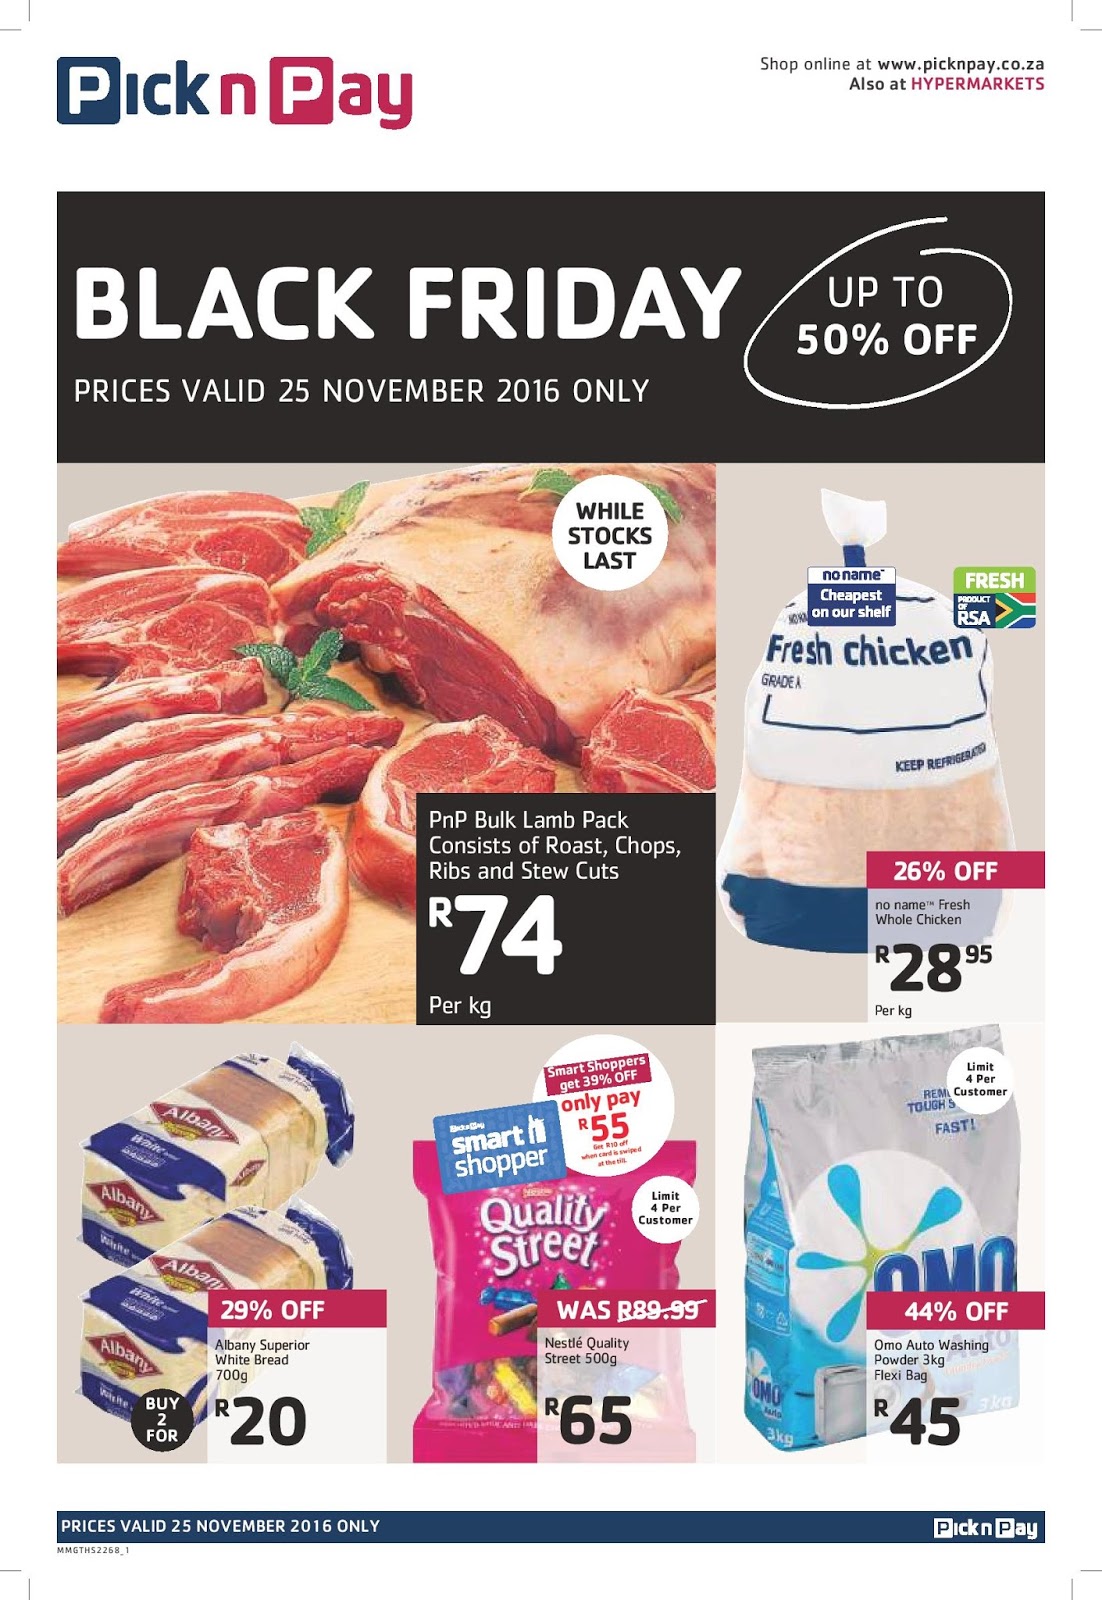 #BlackFriday Pick n Pay Top Best Black Friday Hot deals in South Africa (revealed) - Online Scoops